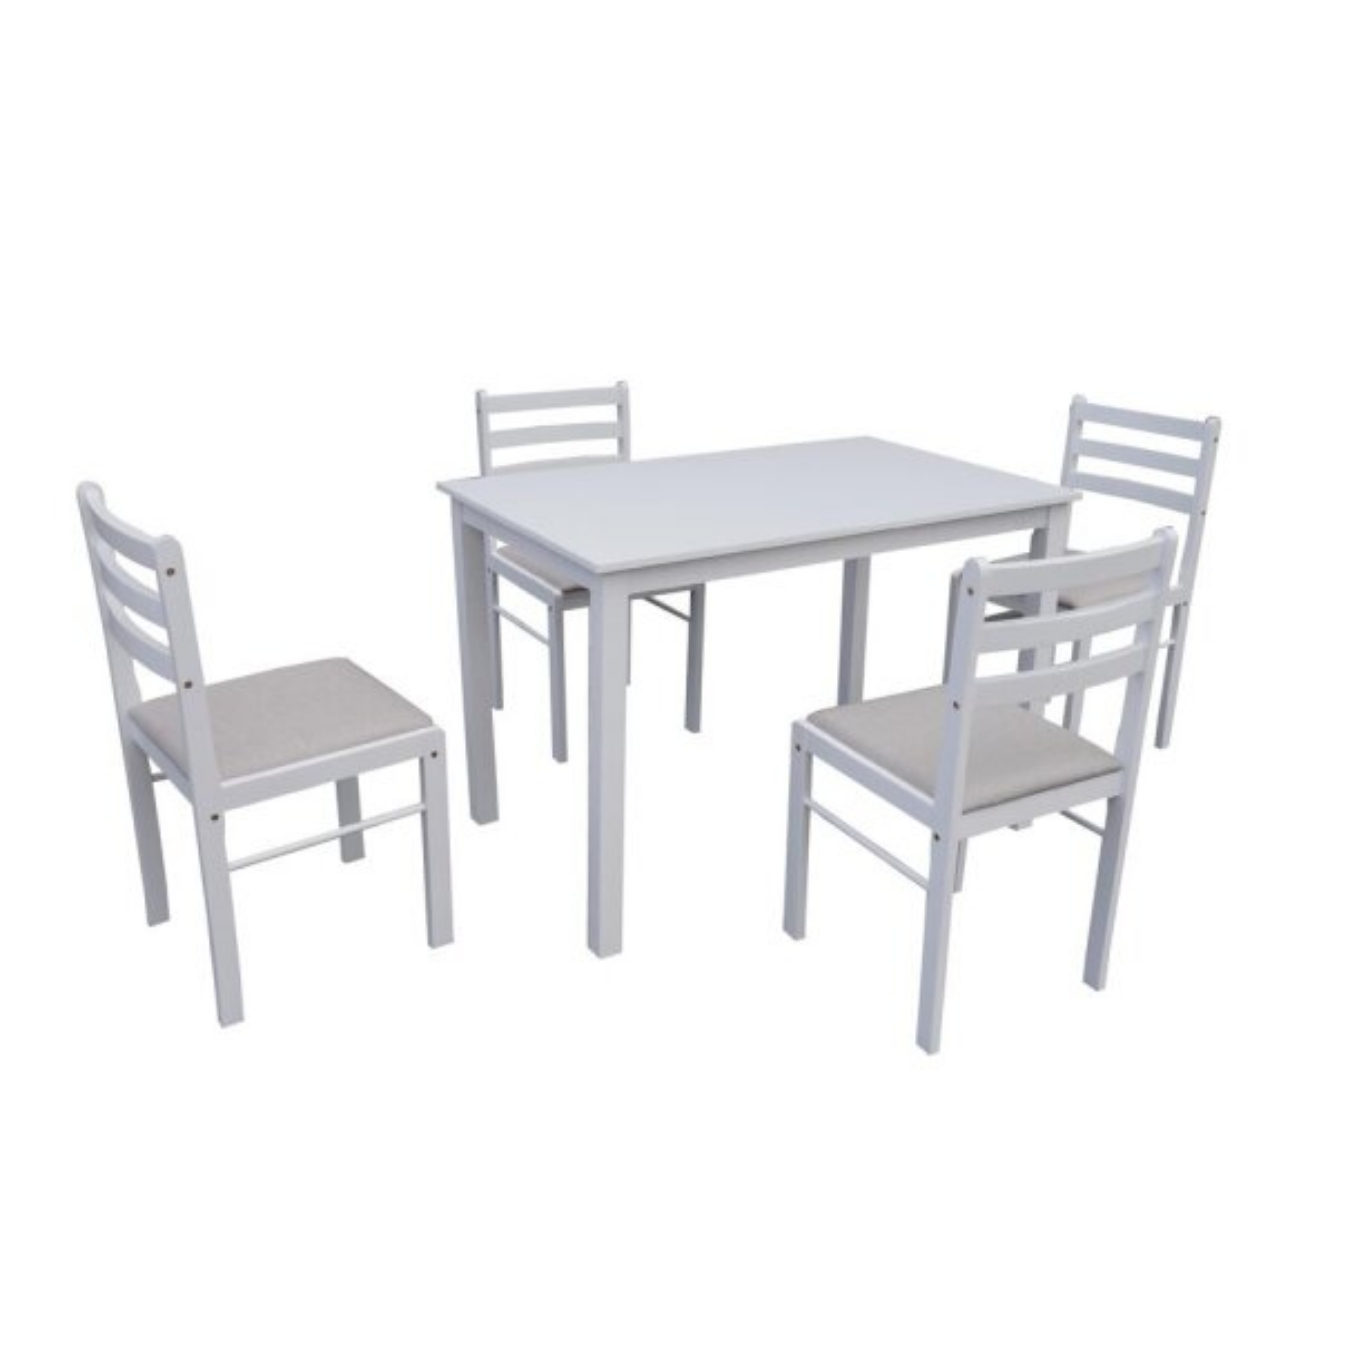 If you need a dining set that’s both versatile and classically stylish, look no further than the CONCORD 5 PIECE DINING SET - WHITE